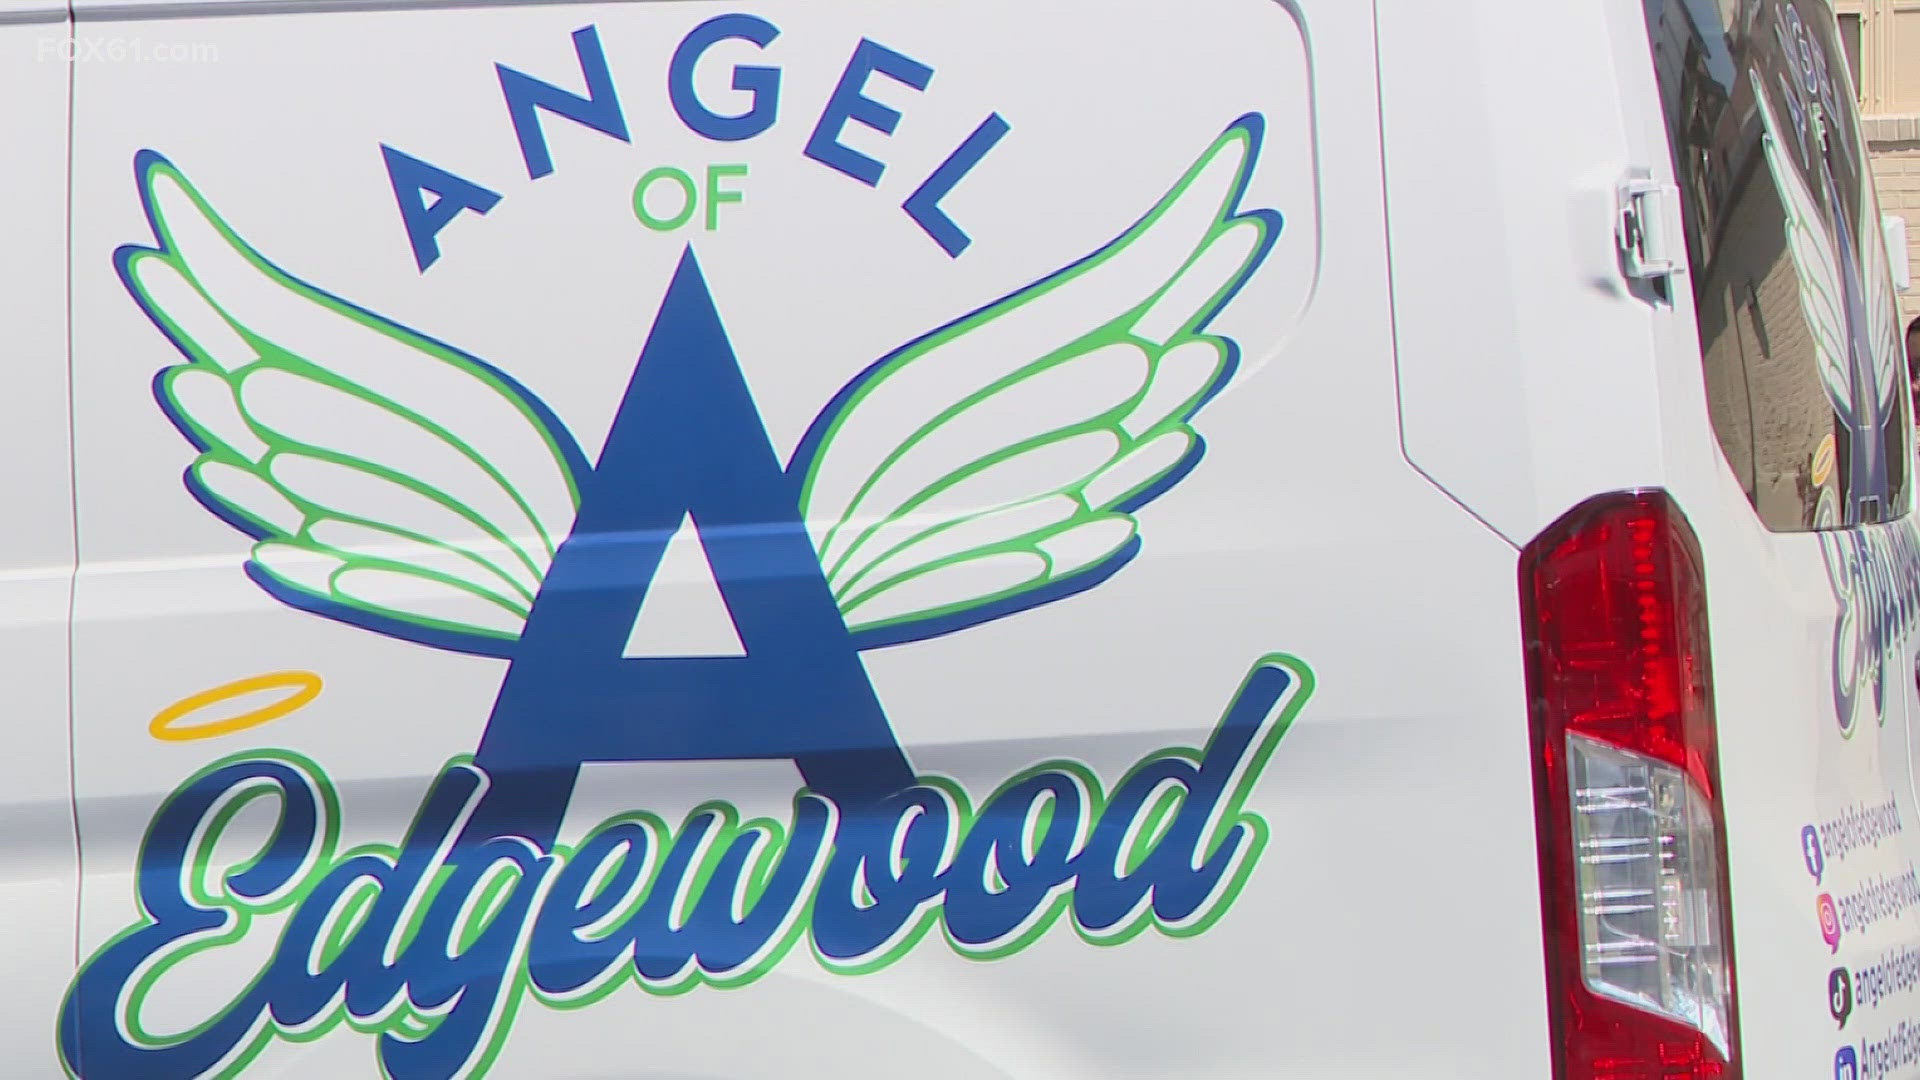 A Connecticut nonprofit is struggling after multiple break-ins over the past several weeks, but help is on the way for Angel of Edgewood.